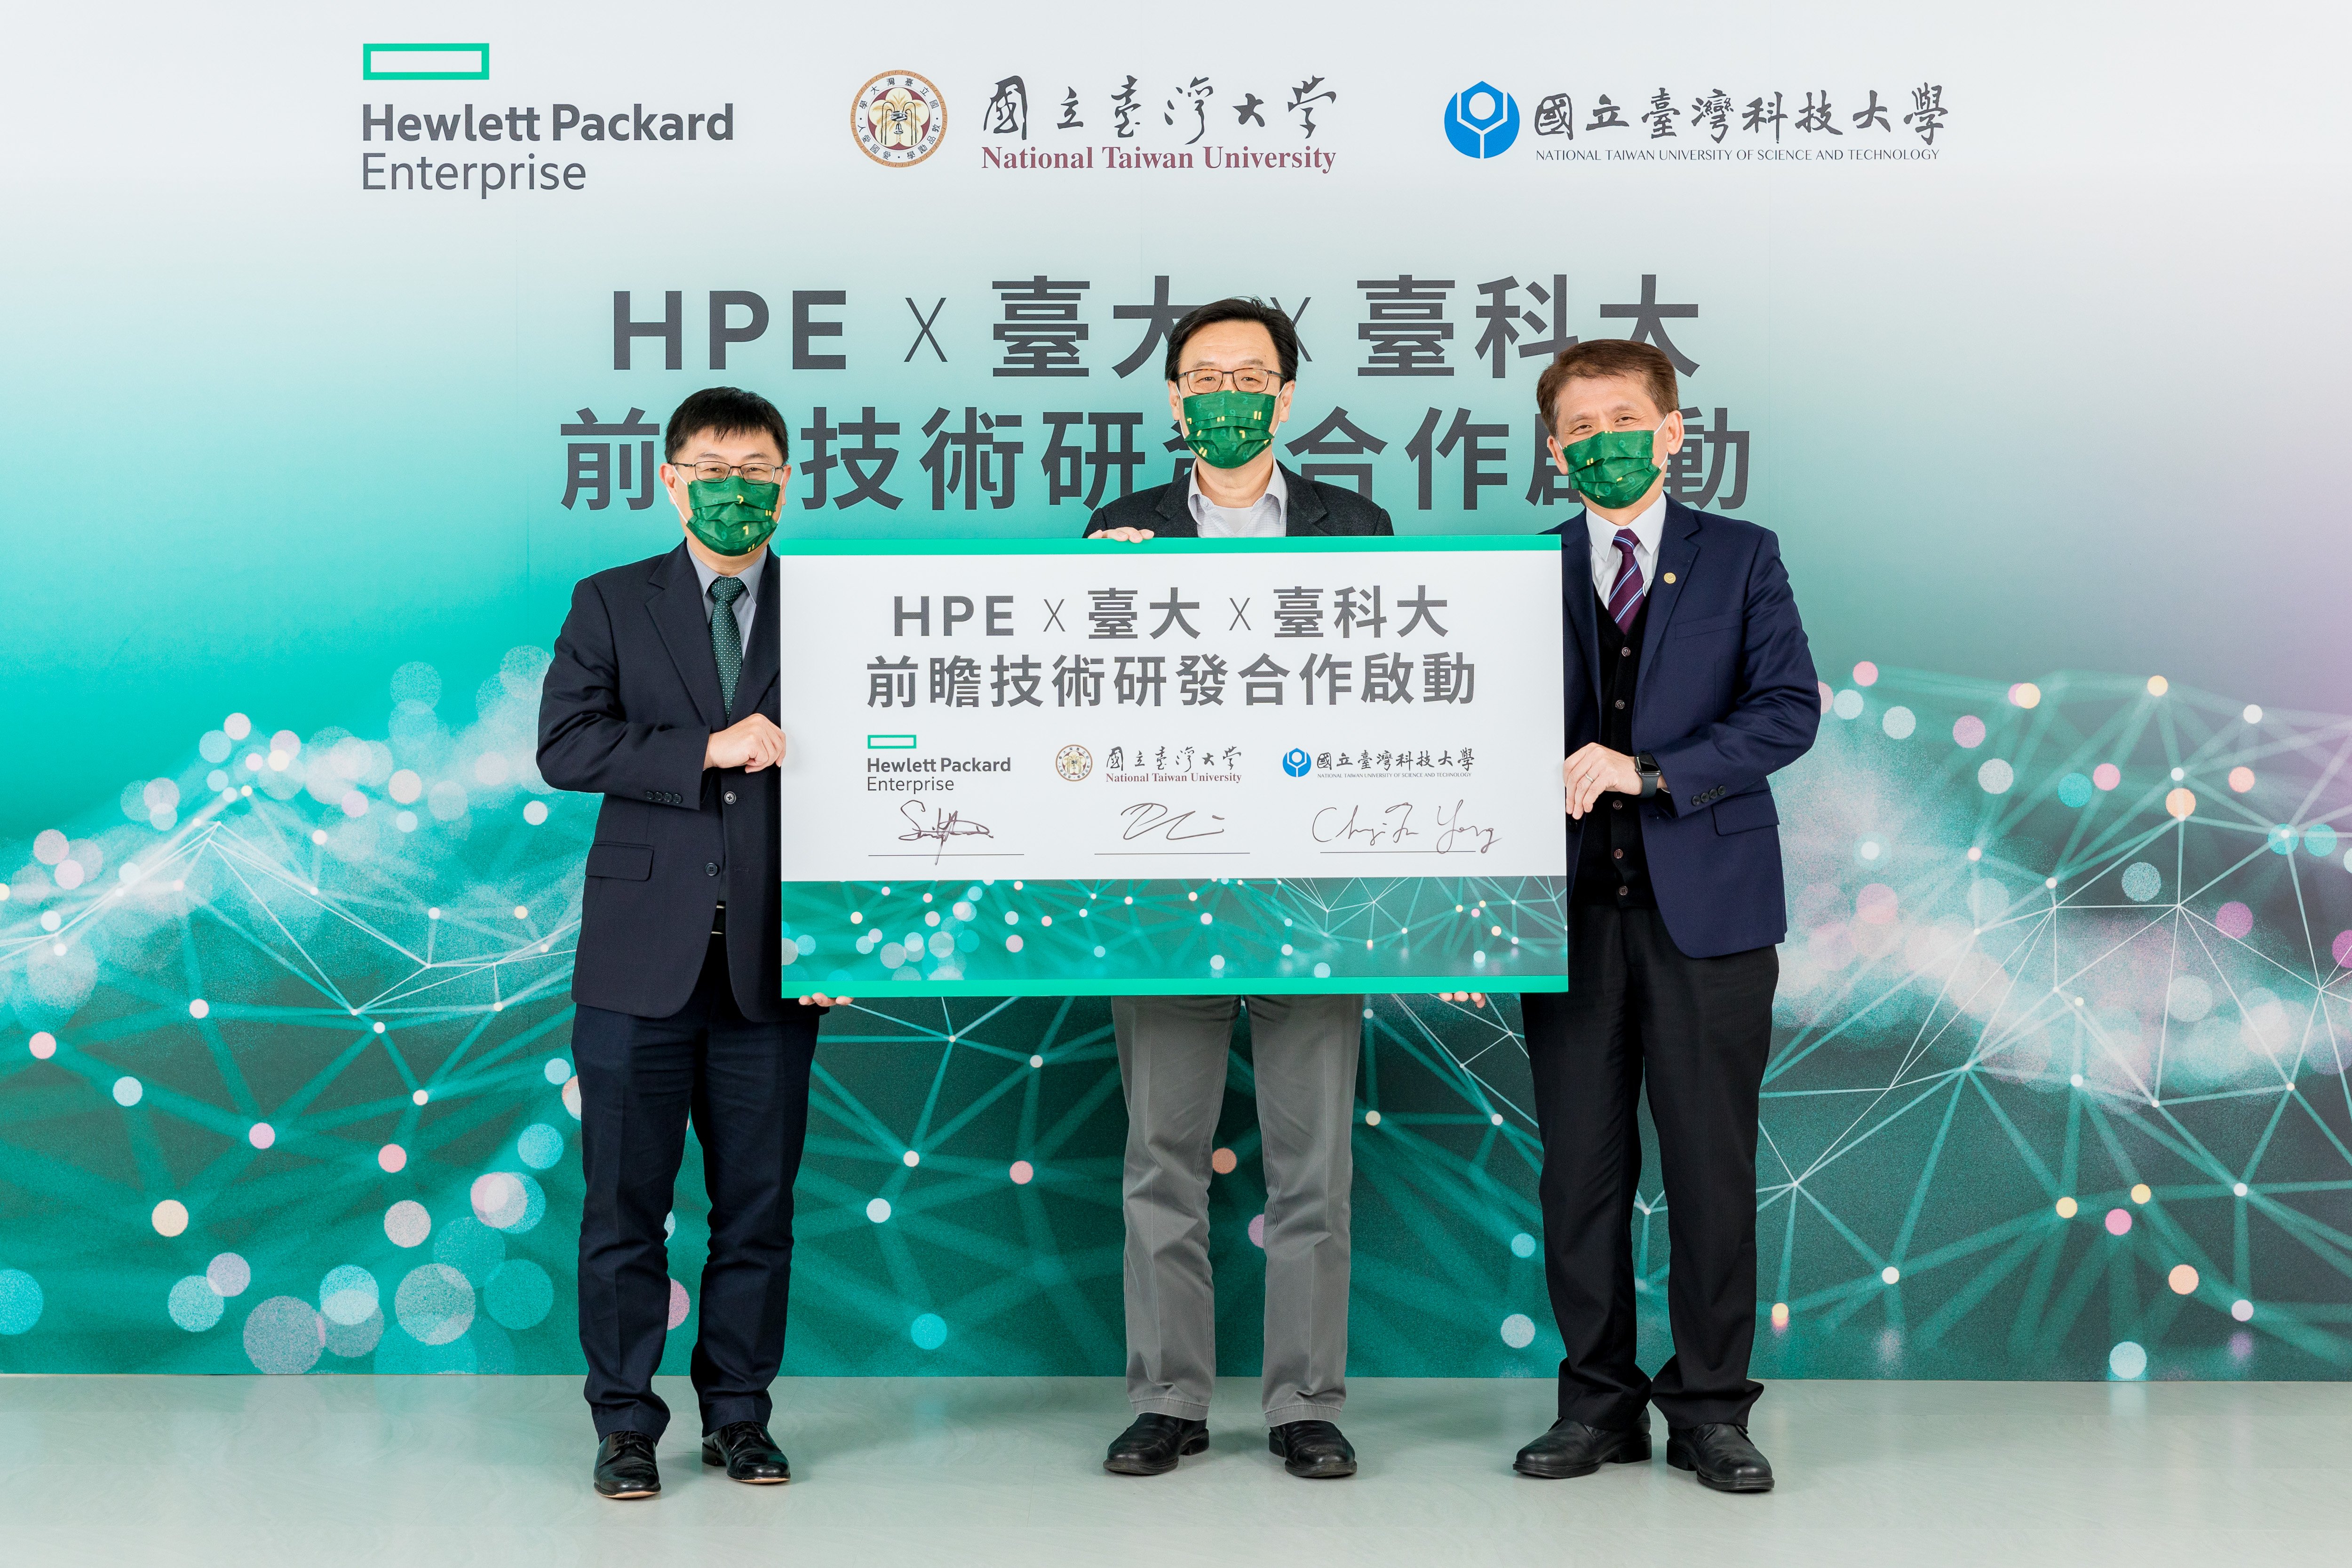 NTU, NTUST and HPE Collaborate on Advanced Technologies Development. Academia and Industry Joint Hands to Help Taiwan Students Enter the International Arena